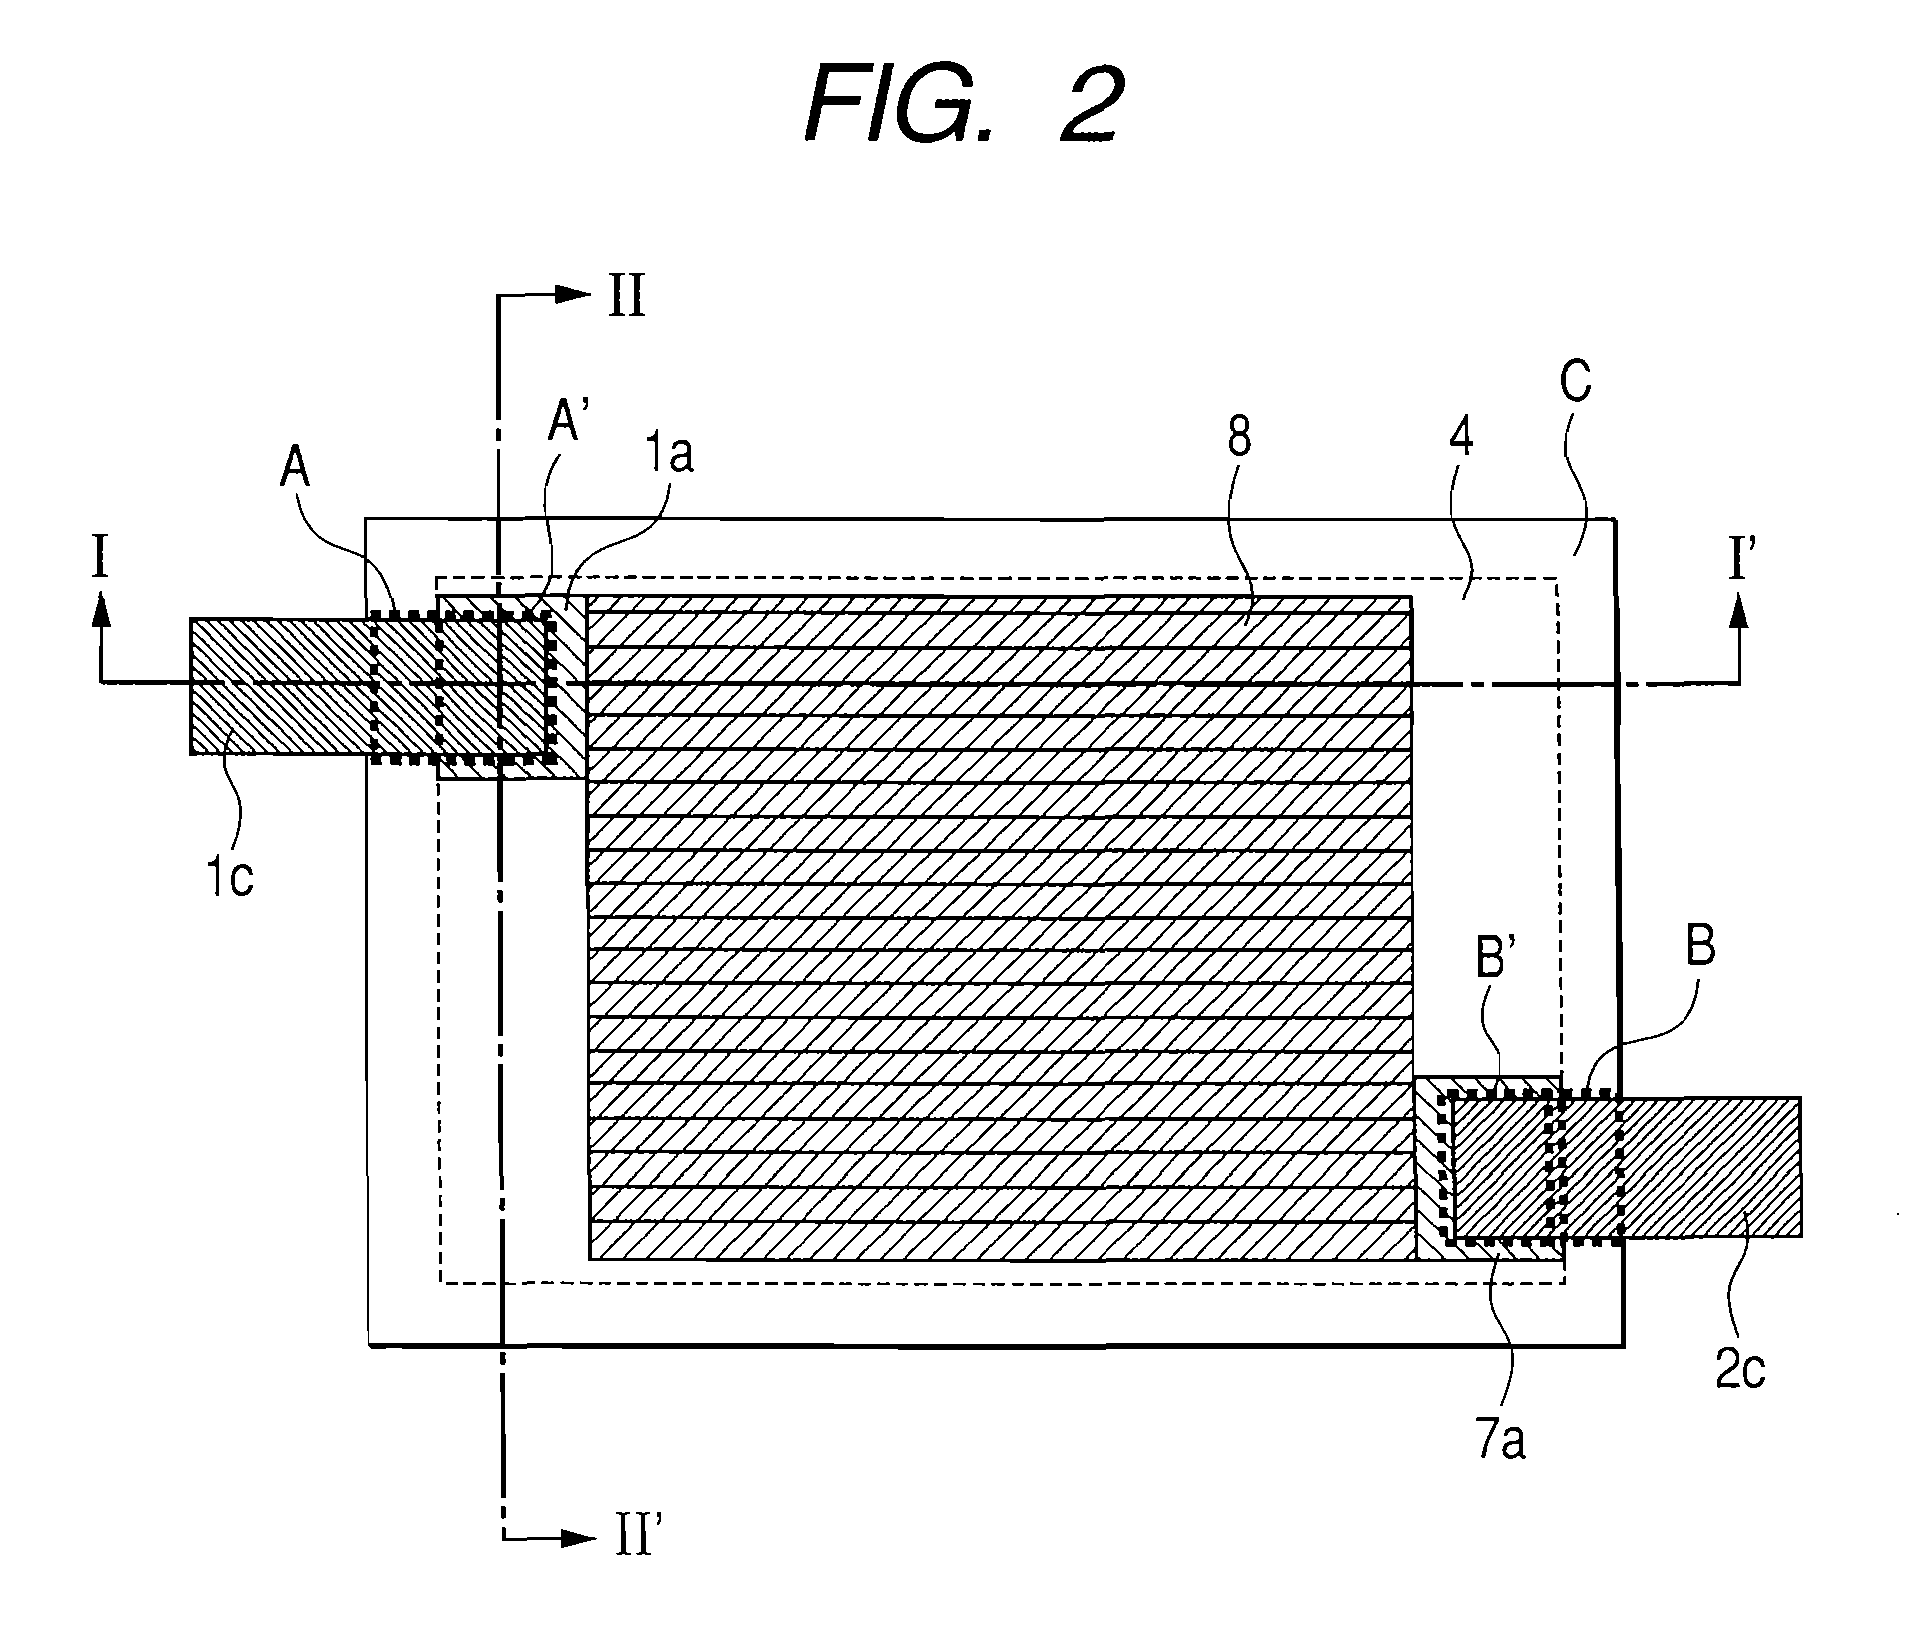 Organic Electrolyte Capacitor Using a Mesopore Carbon Material as a Negative Electrode